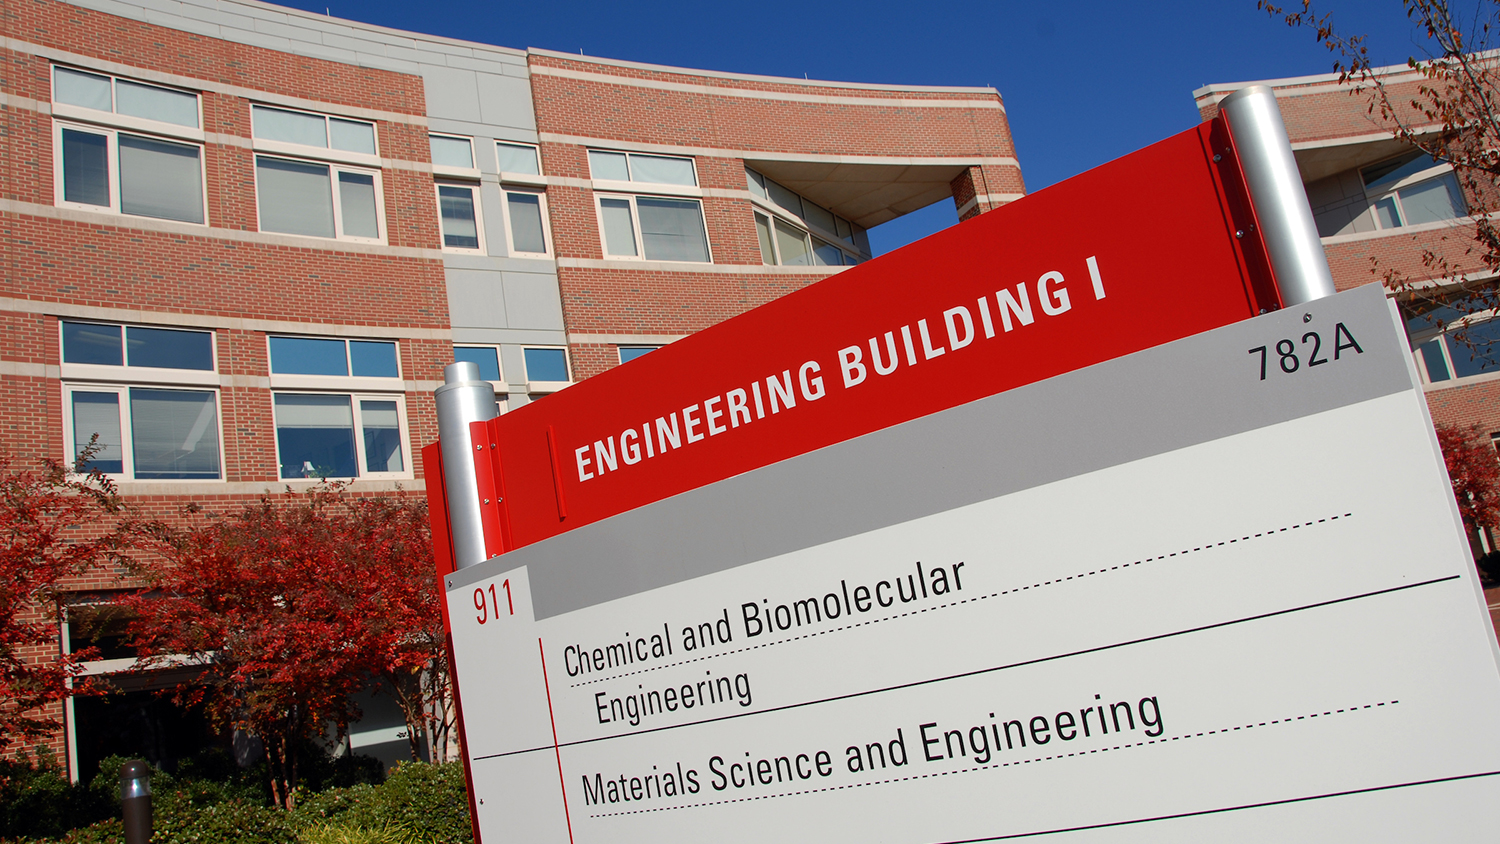 Engineering Building 1 exterior sign